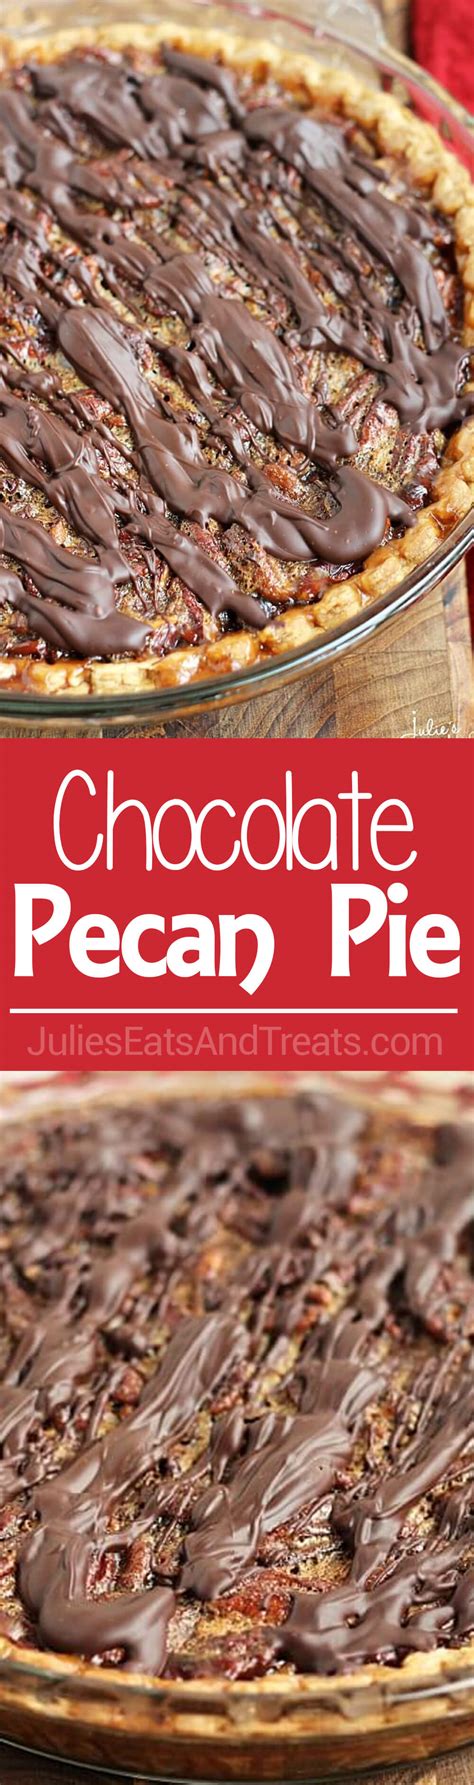 Chocolate Pecan Pie A Traditional Classic Pie Loaded With Pecans And